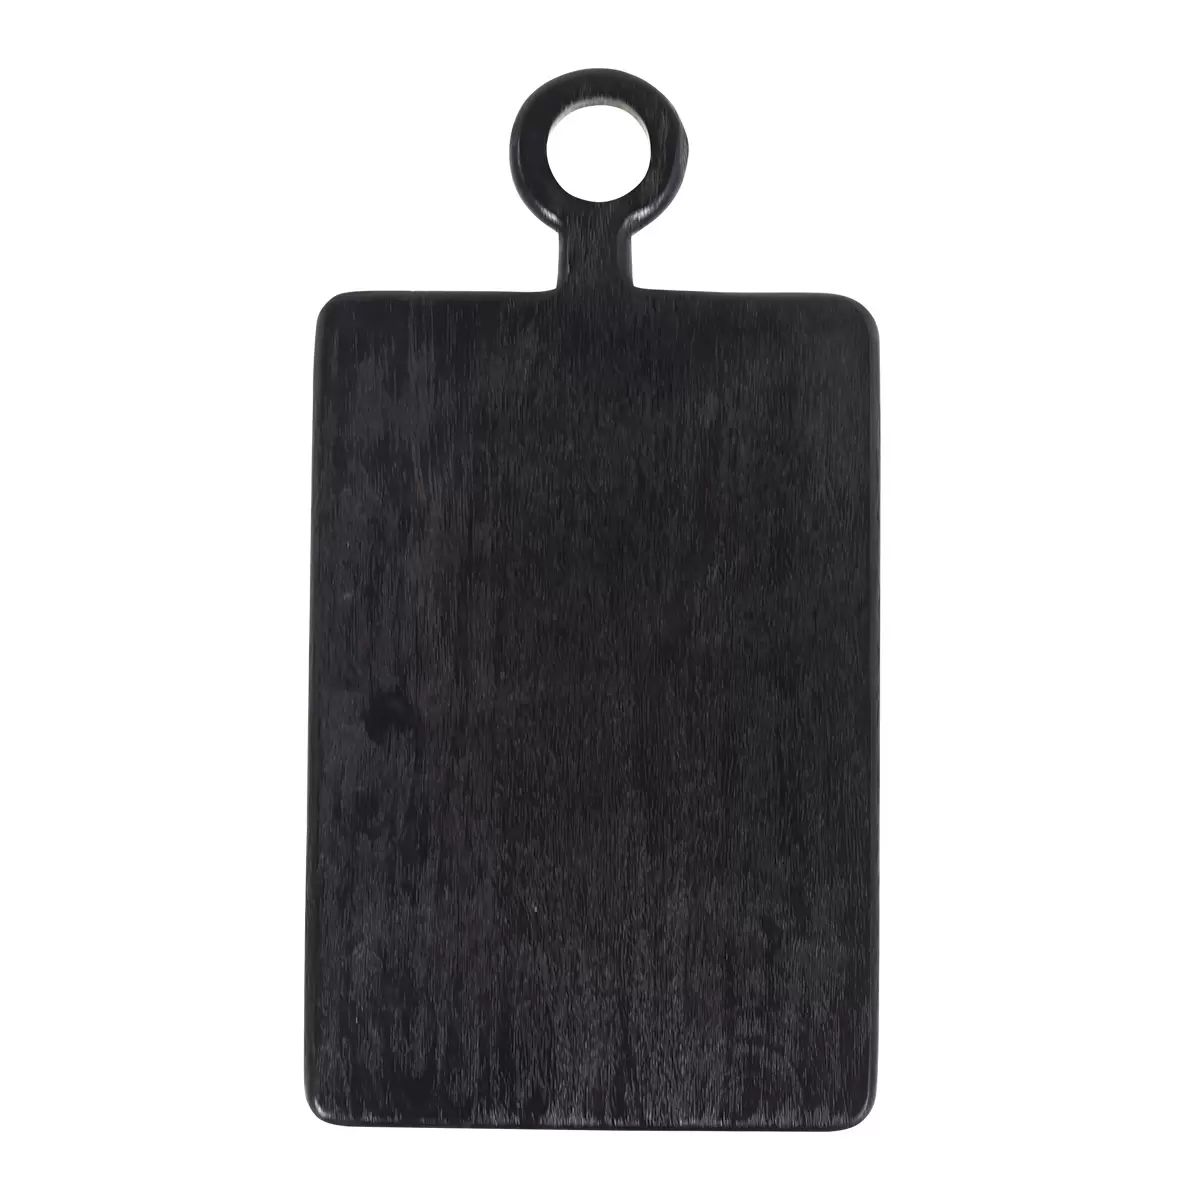 Be Home Arendal Serving Board | The Container Store